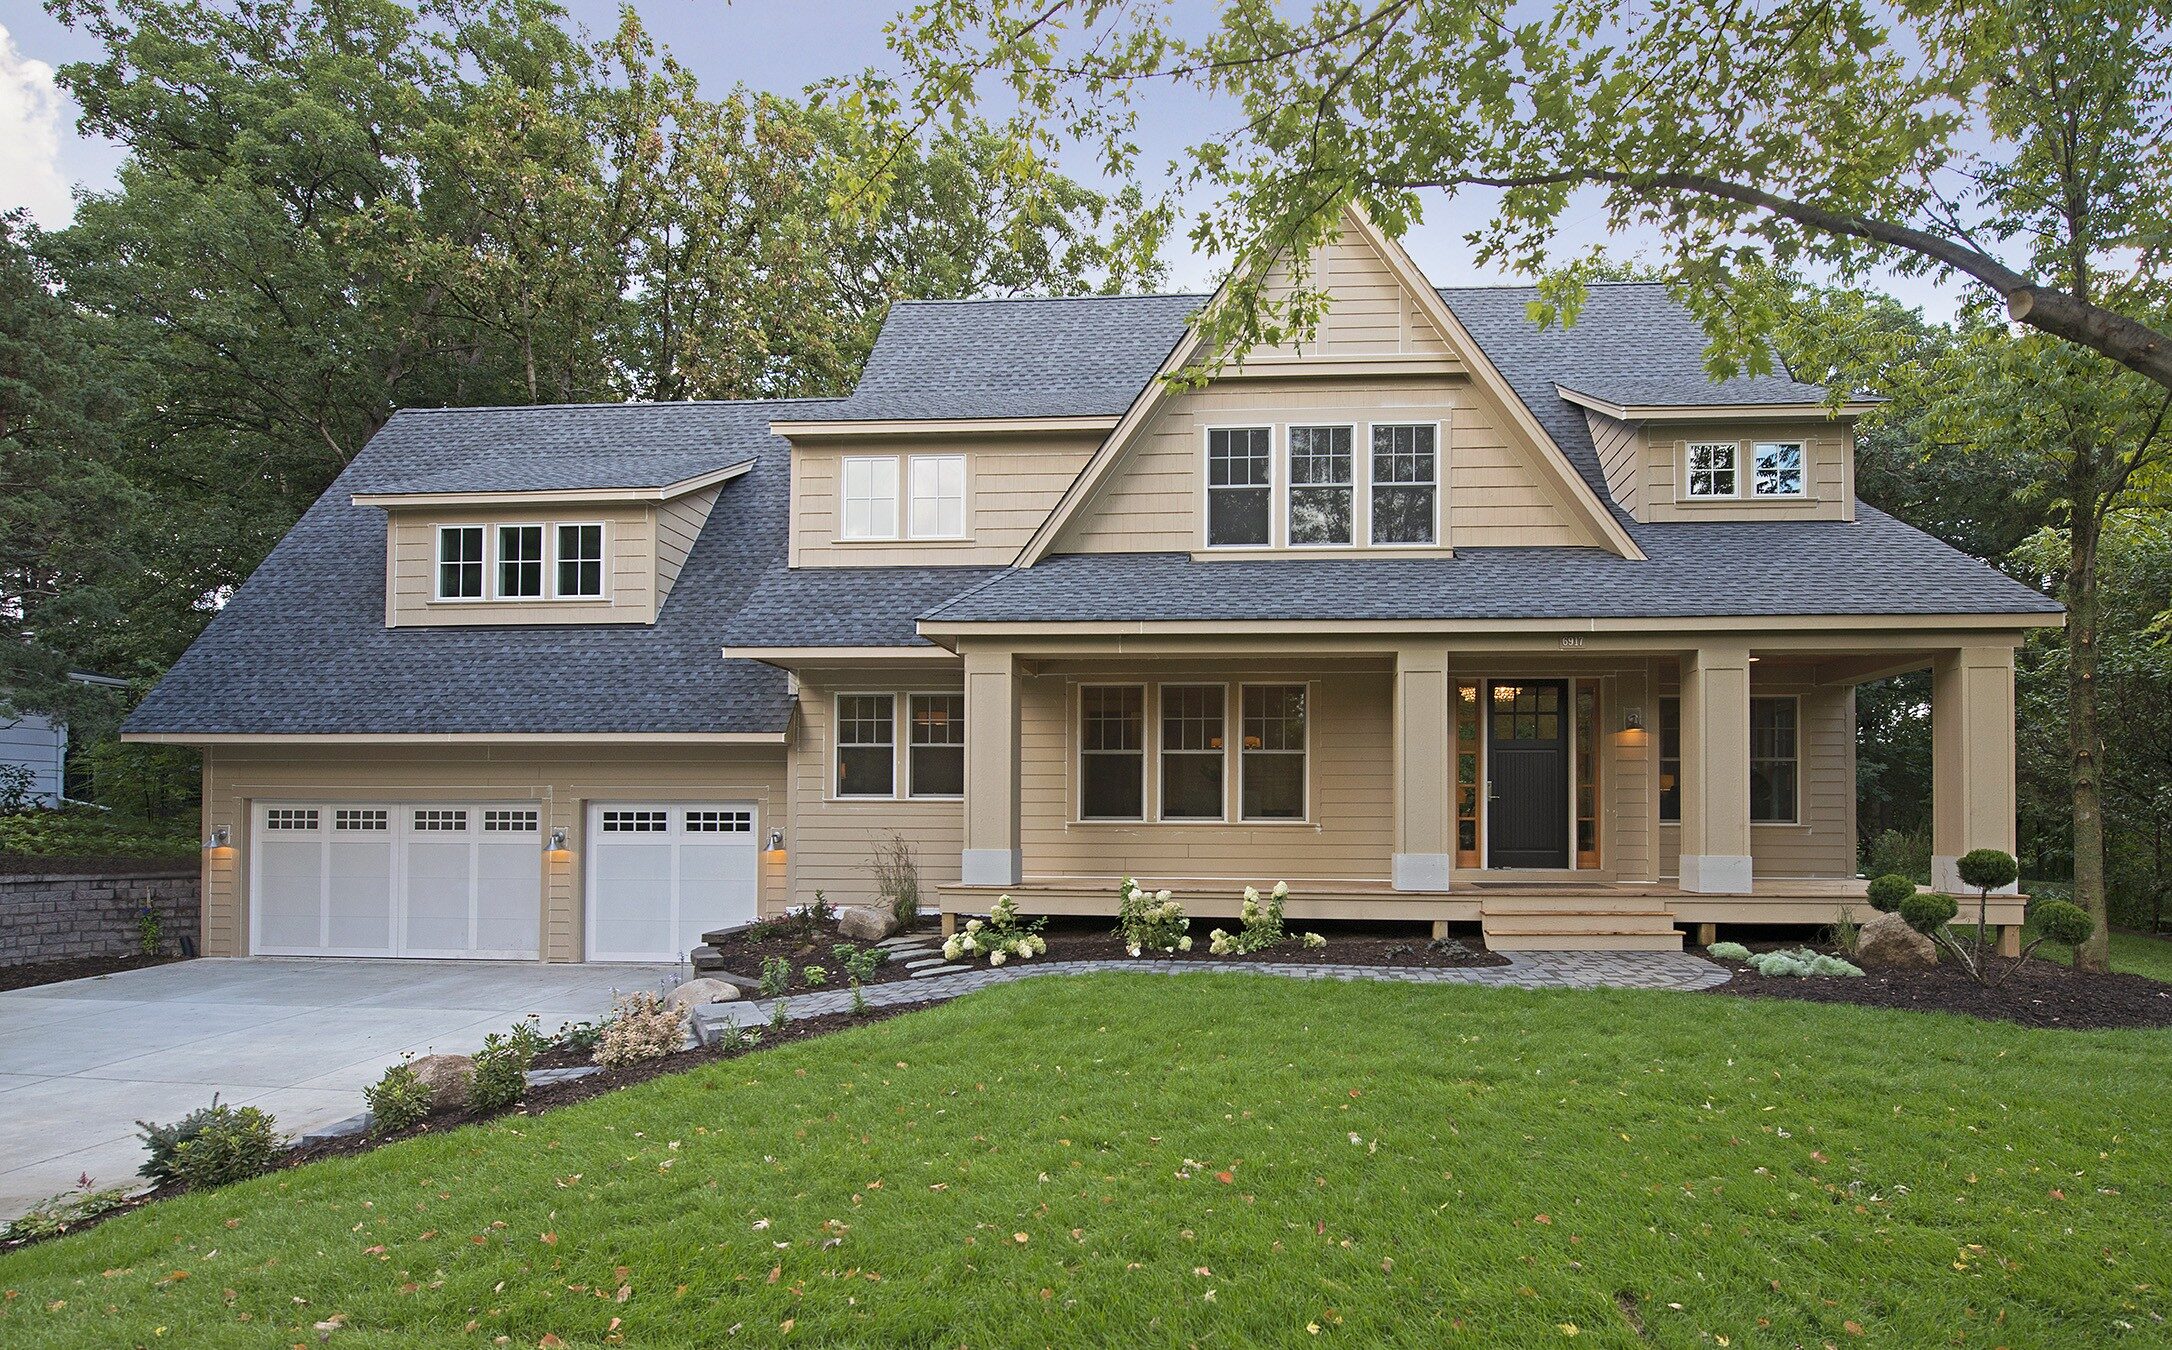 A home with a large front yard and a garage, designed and built by Exteriors by Highmark in Savage, Minnesota.